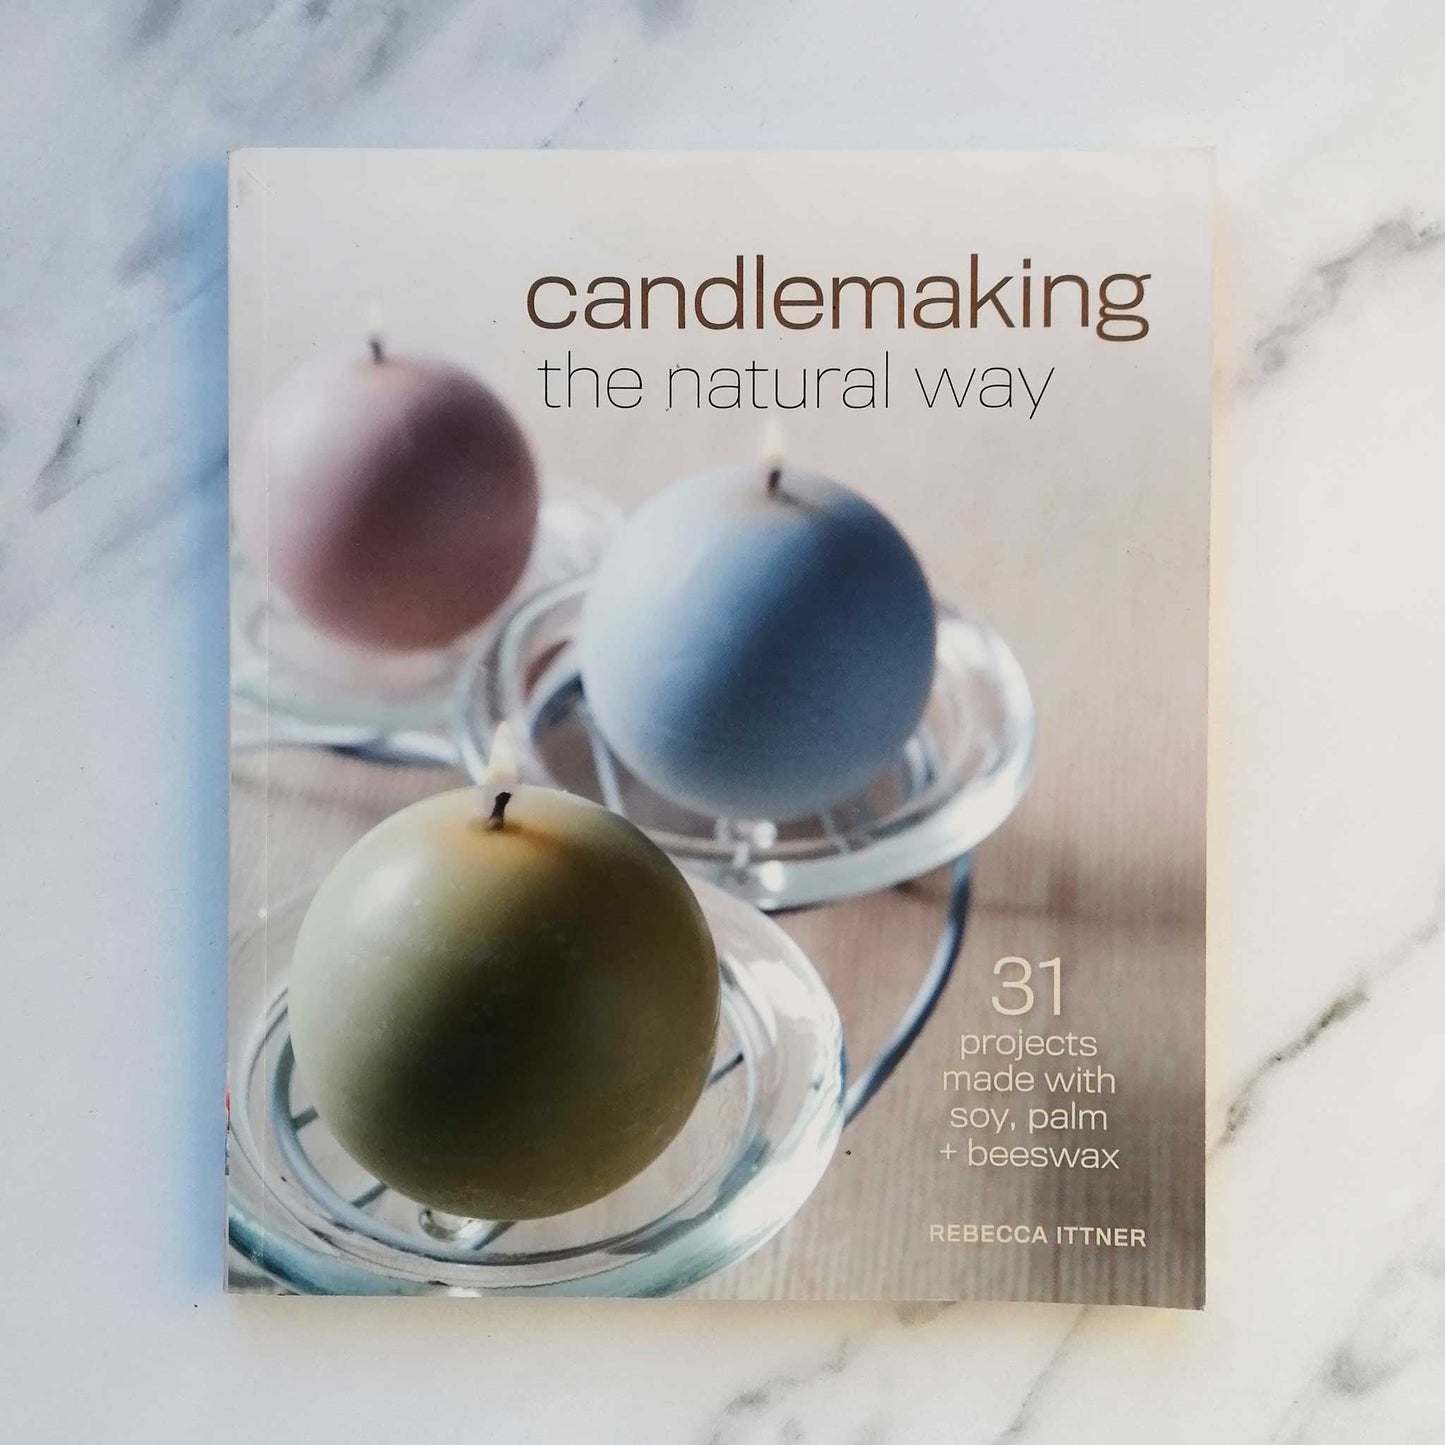 Our Bookshelf Print Books Candlemaking The Natural Way - 31 Projects Made with Soy, Palm and Beeswax